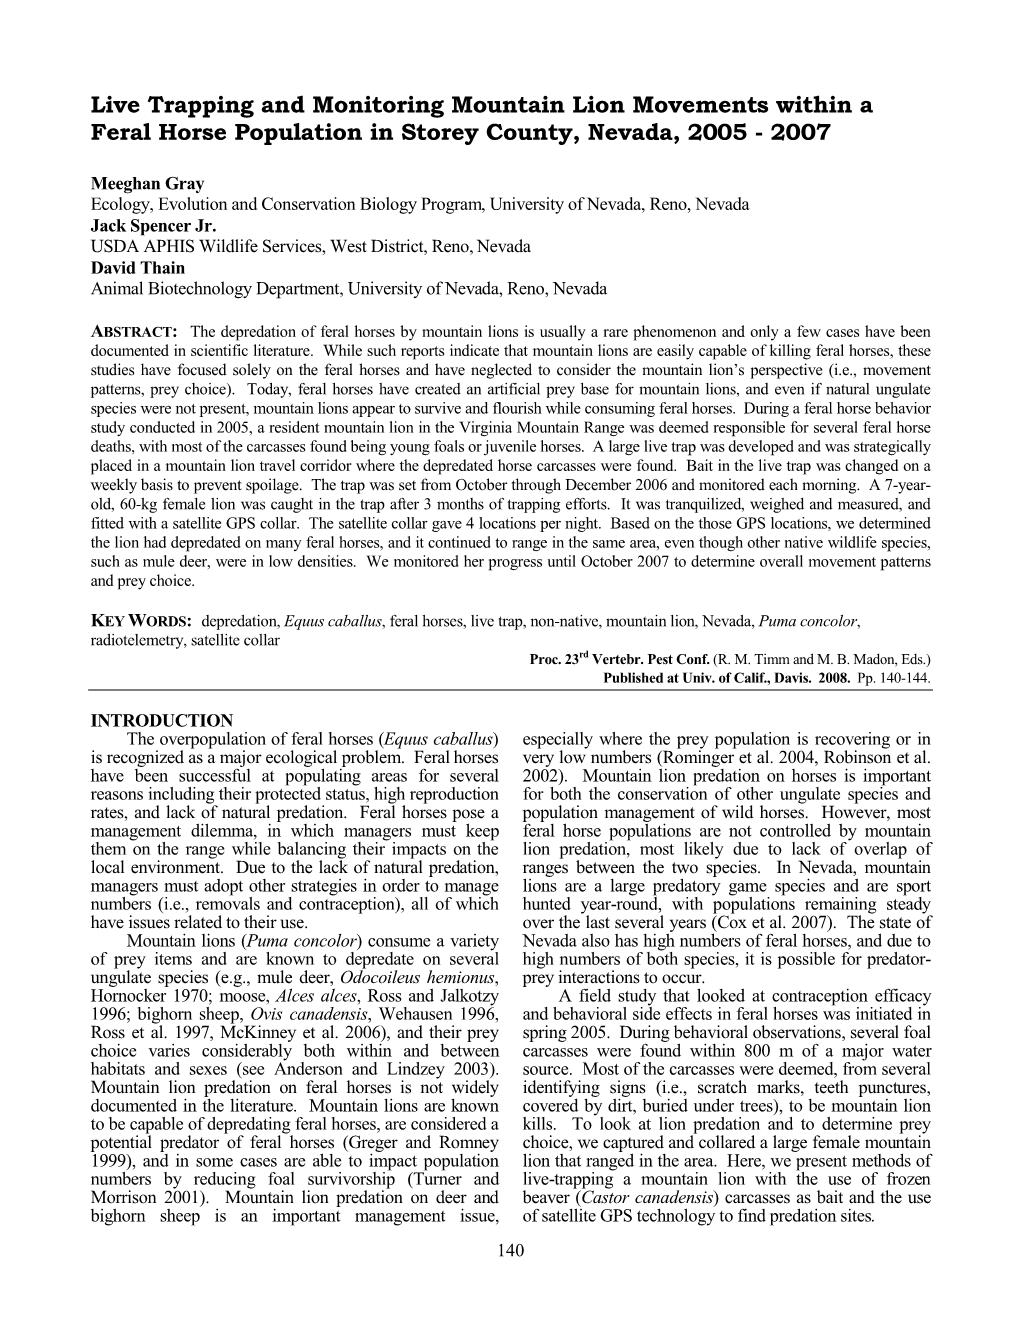 Live Trapping and Monitoring Mountain Lion Movements Within a Feral Horse Population in Storey County, Nevada, 2005 - 2007